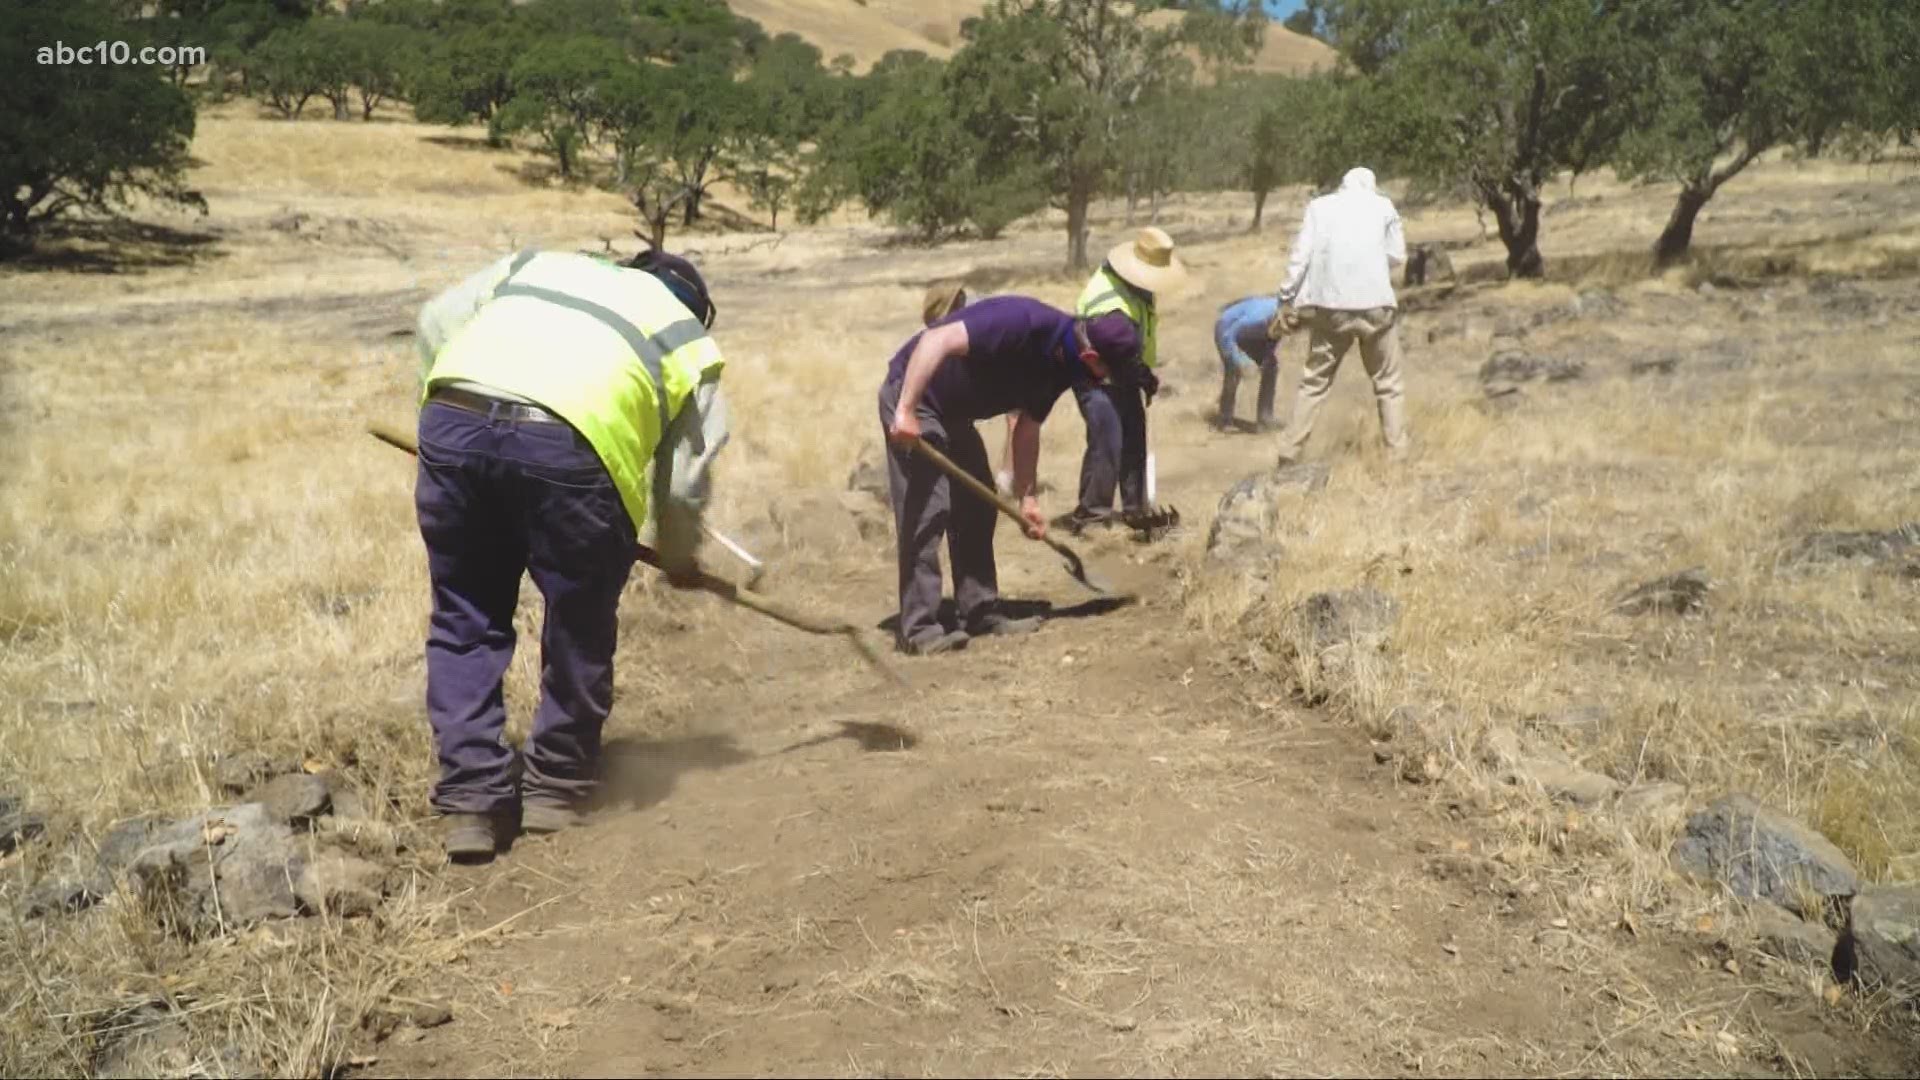 The Solano Land Trust is working with the Yocha Dehe Wintun Nation to preserve the land that once belonged to the tribe.